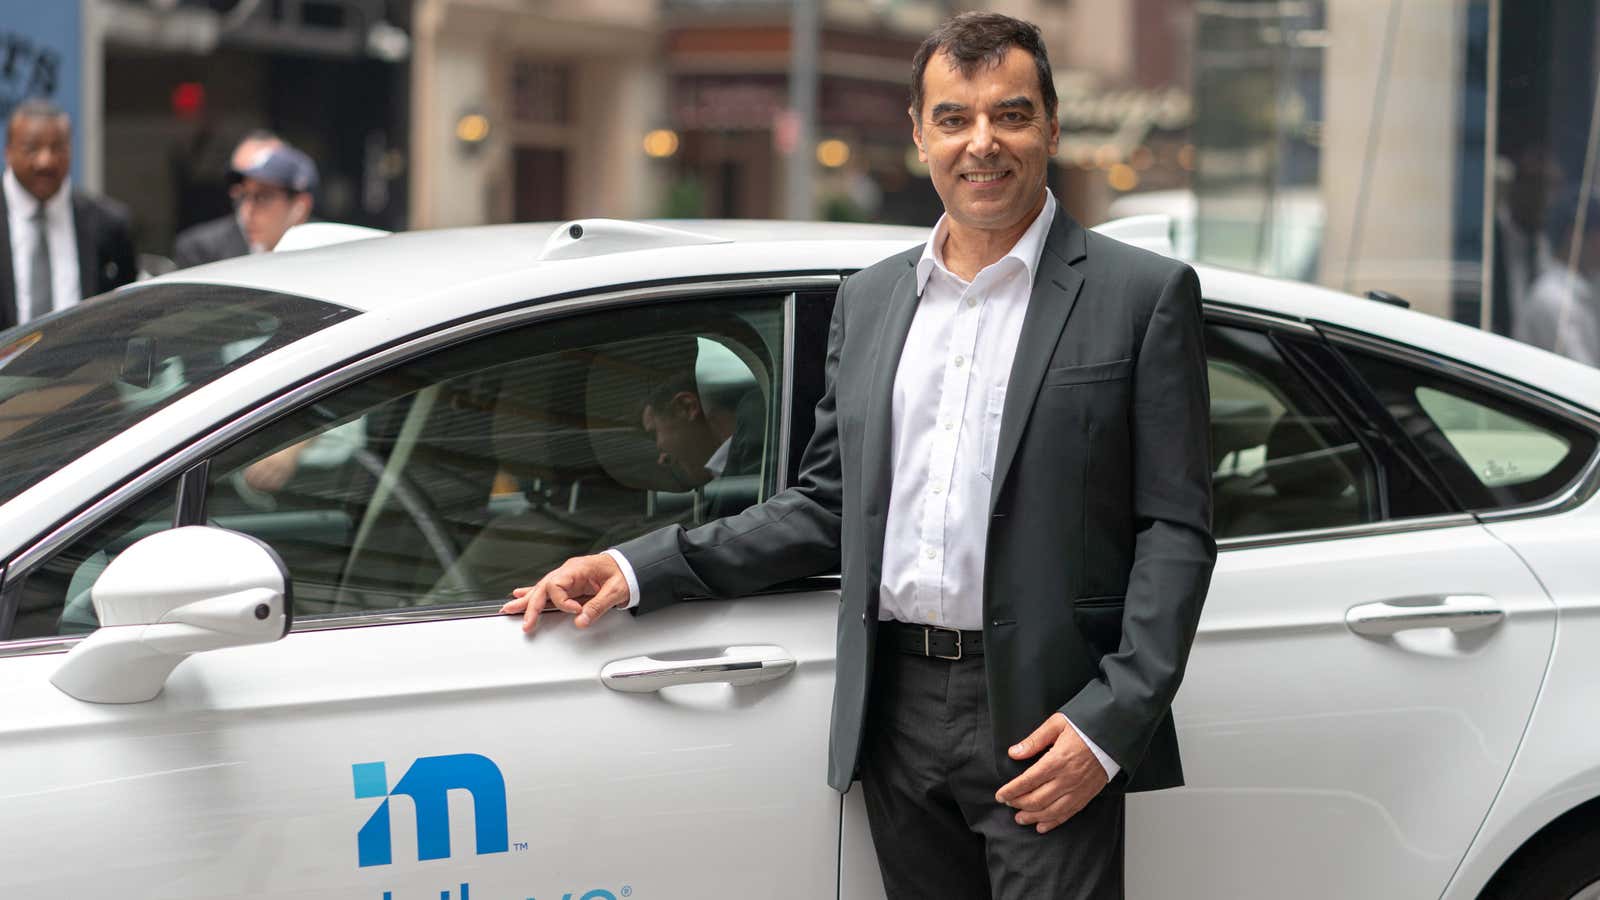 Mobileye’s CEO Amnon Shashua poses with a Mobileye driverless vehicle at the Nasdaq Market site in New York, U.S., July 20, 2021.